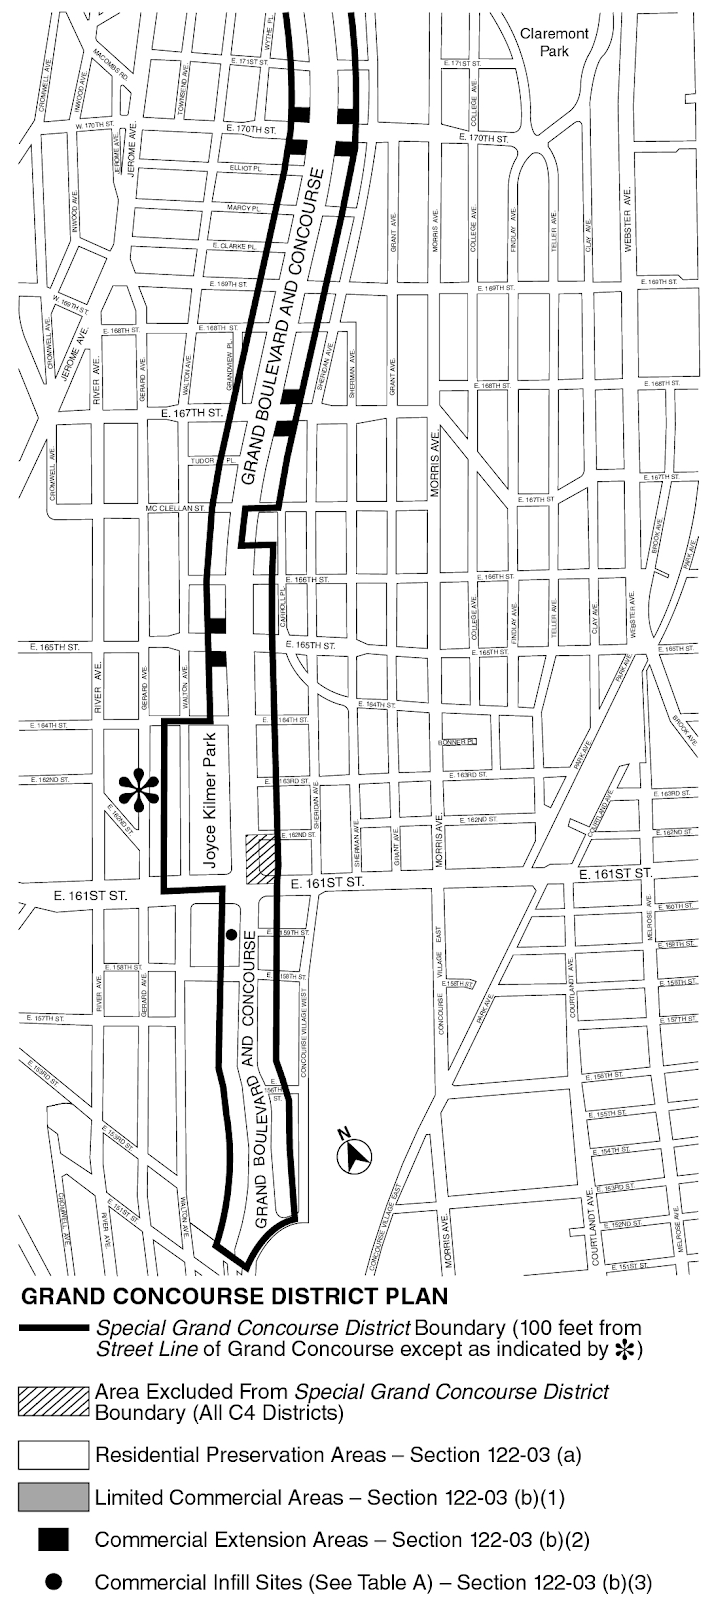 Zoning Resolutions Chapter 2: Special Grand Concourse Preservation District Appendix A.2